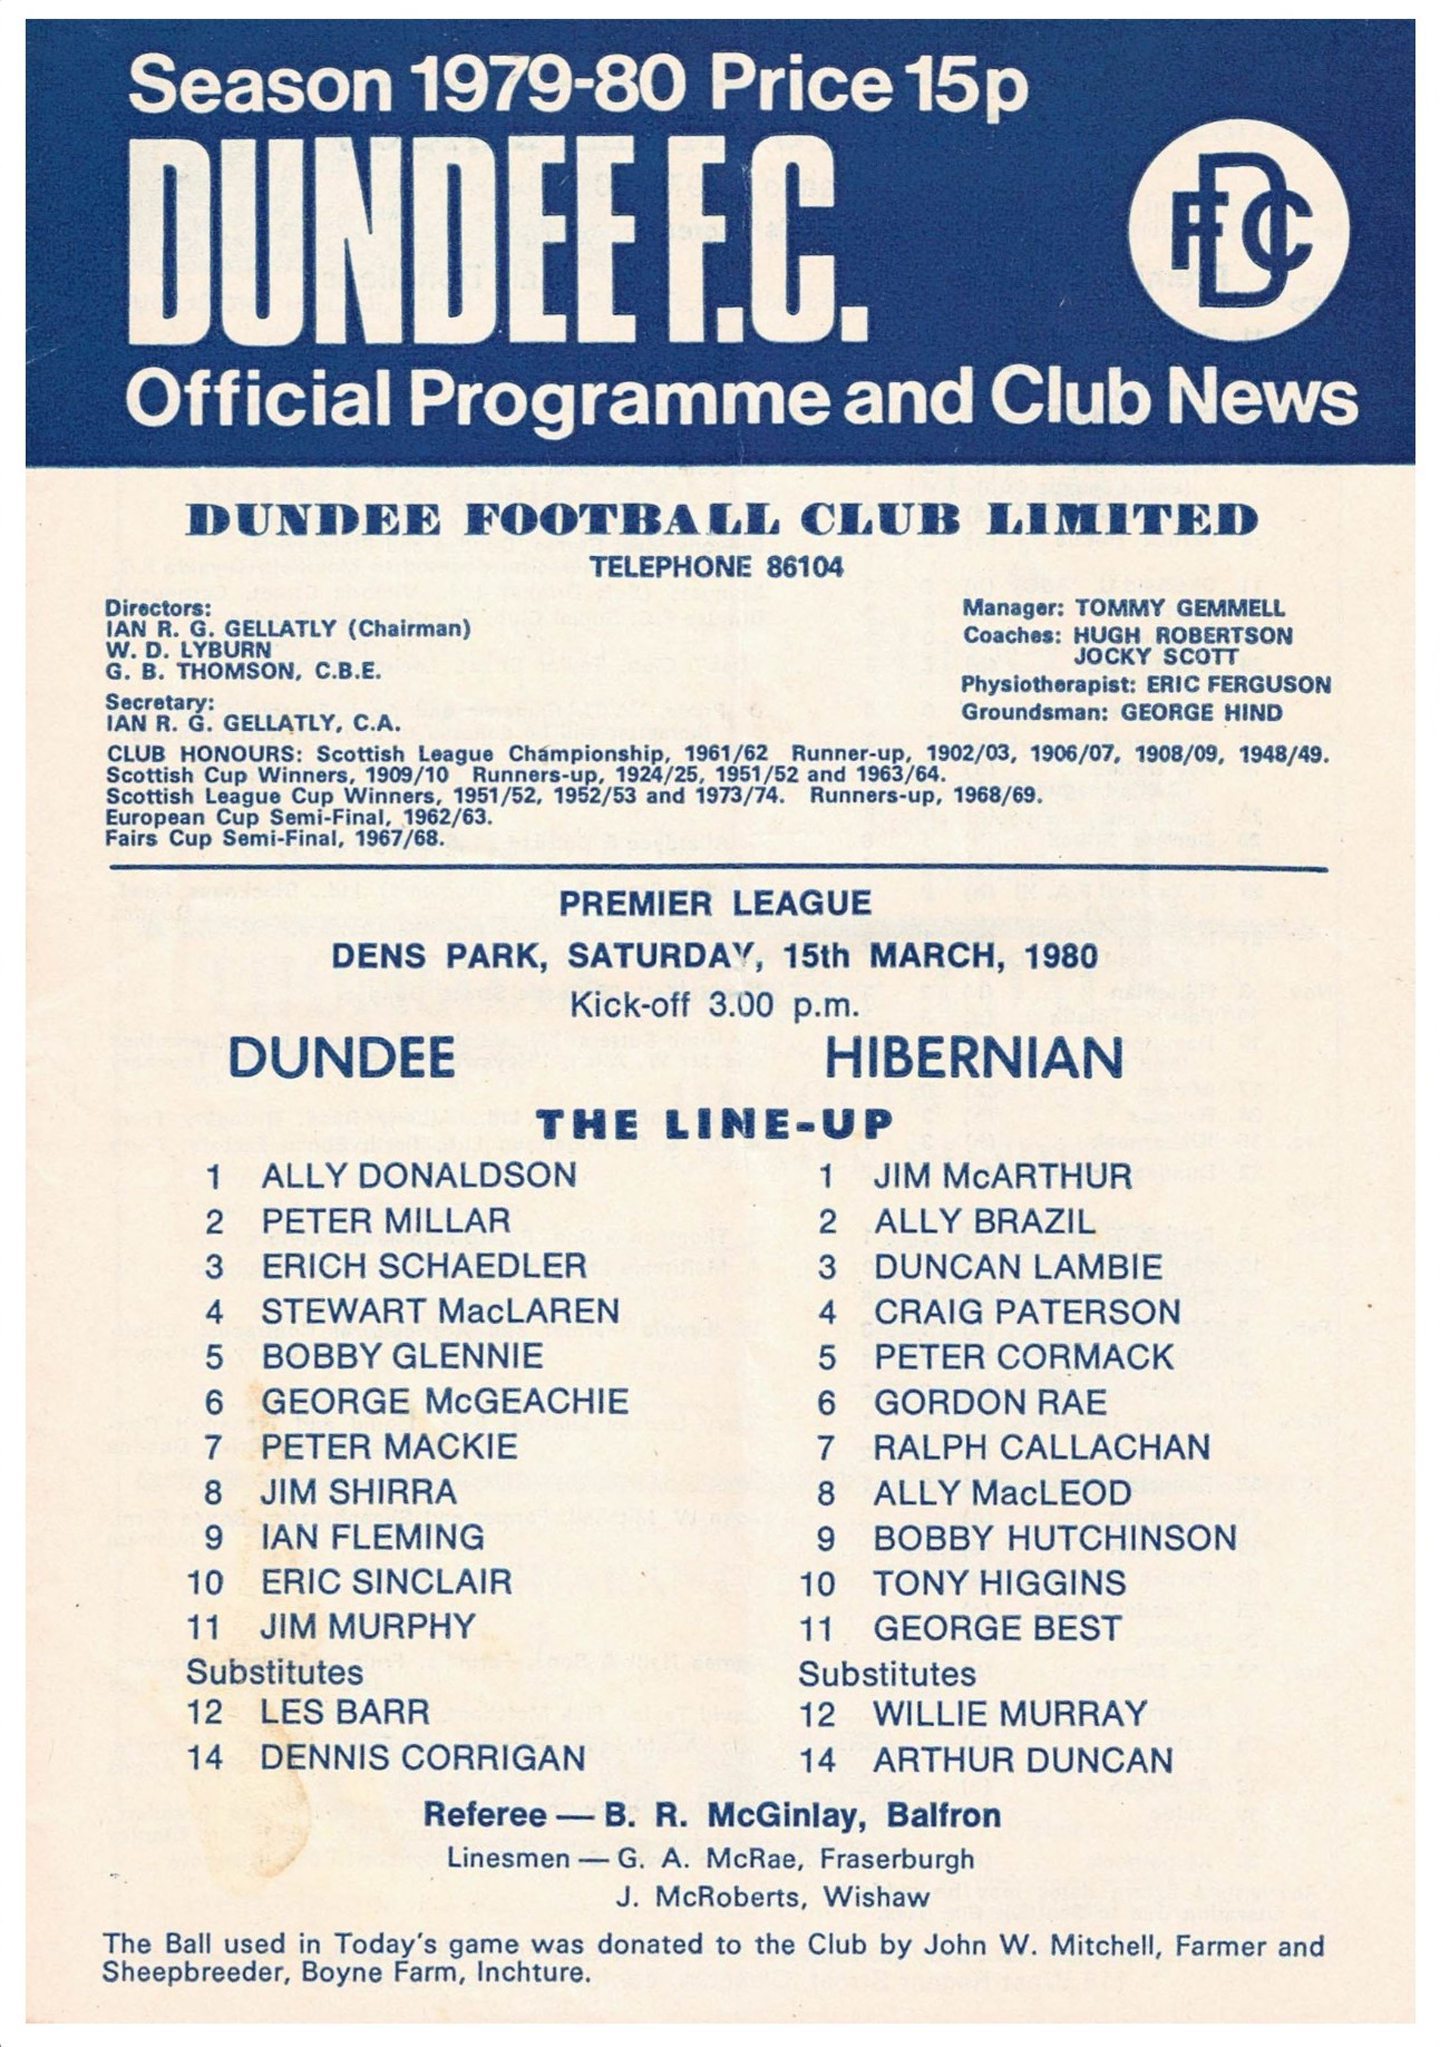 The Dundee FC matchday programme against Hibernian, with George Best listed at number 11.